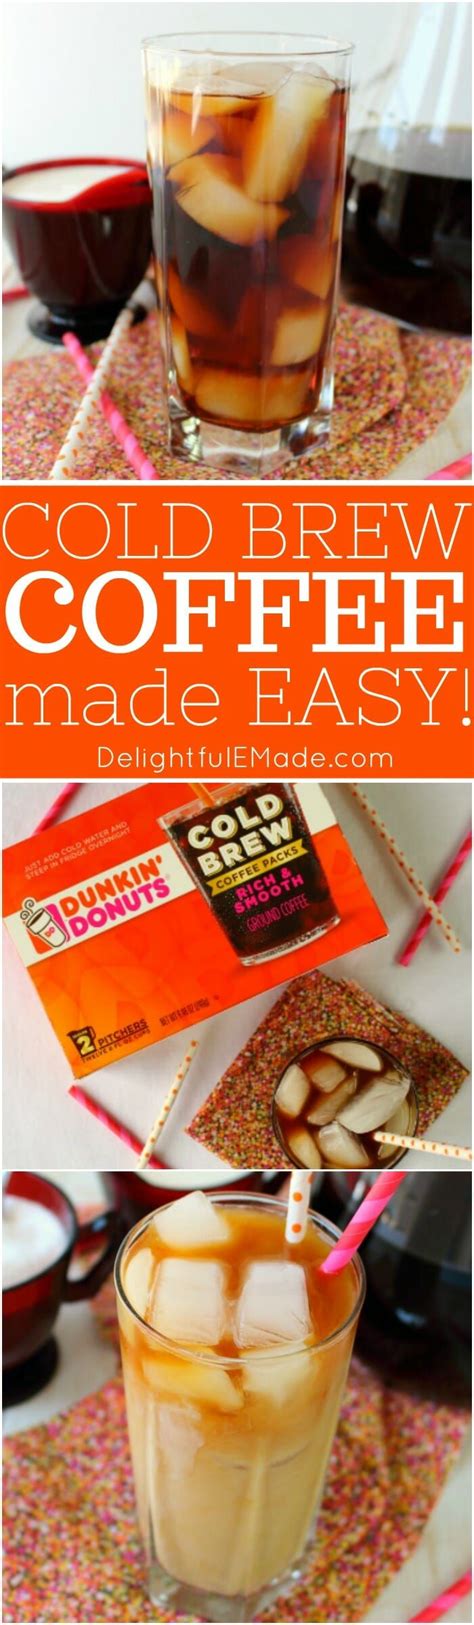 Making Cold Brew Coffee At Home Just Got A Whole Lot Easier With Dunkin Donuts Cold Brew You